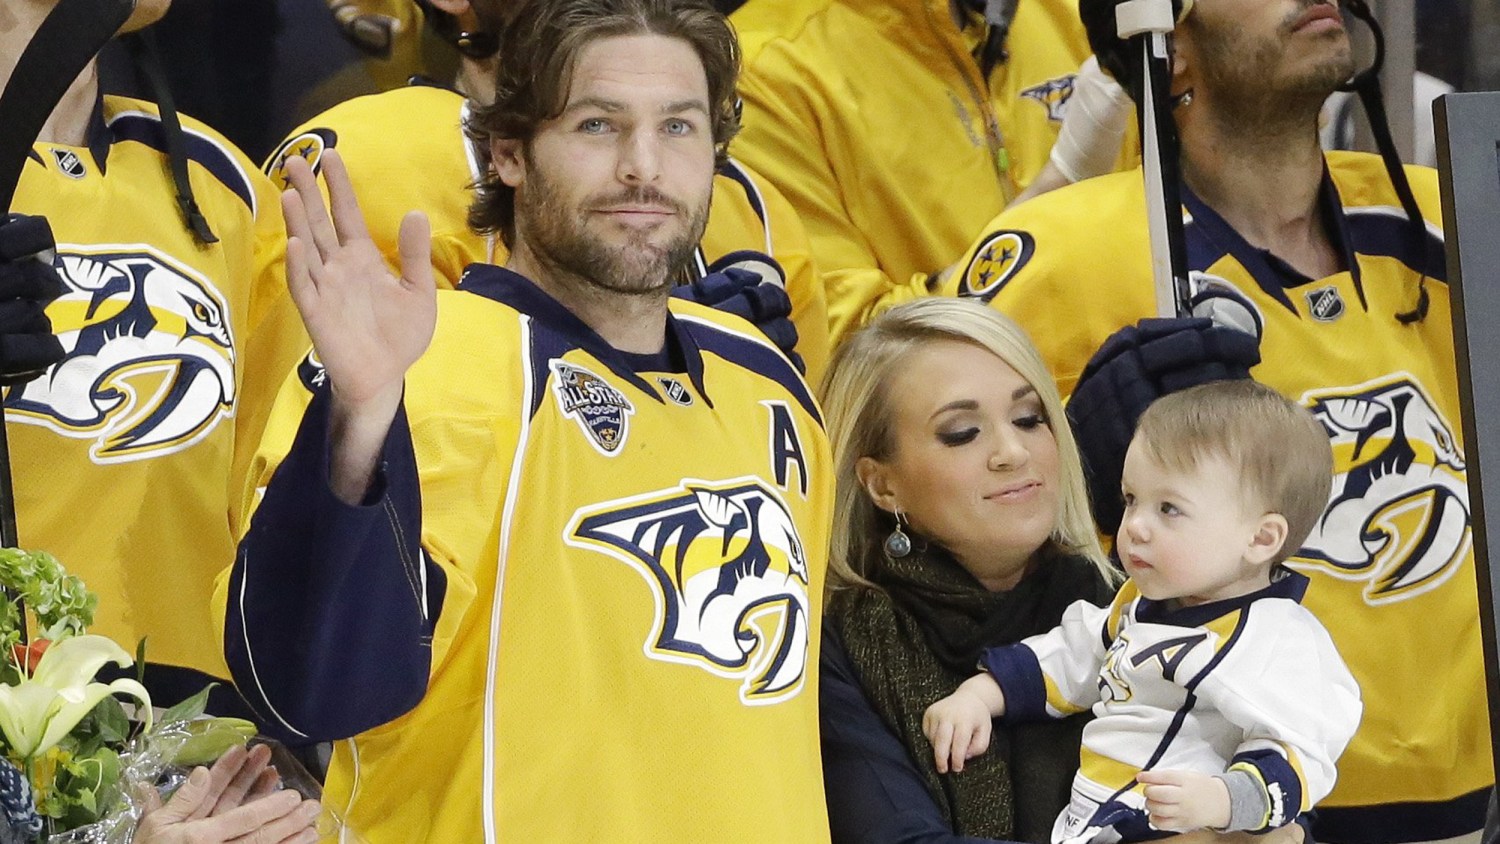 Carrie Underwood 'going to miss' watching Predators' Mike Fisher play